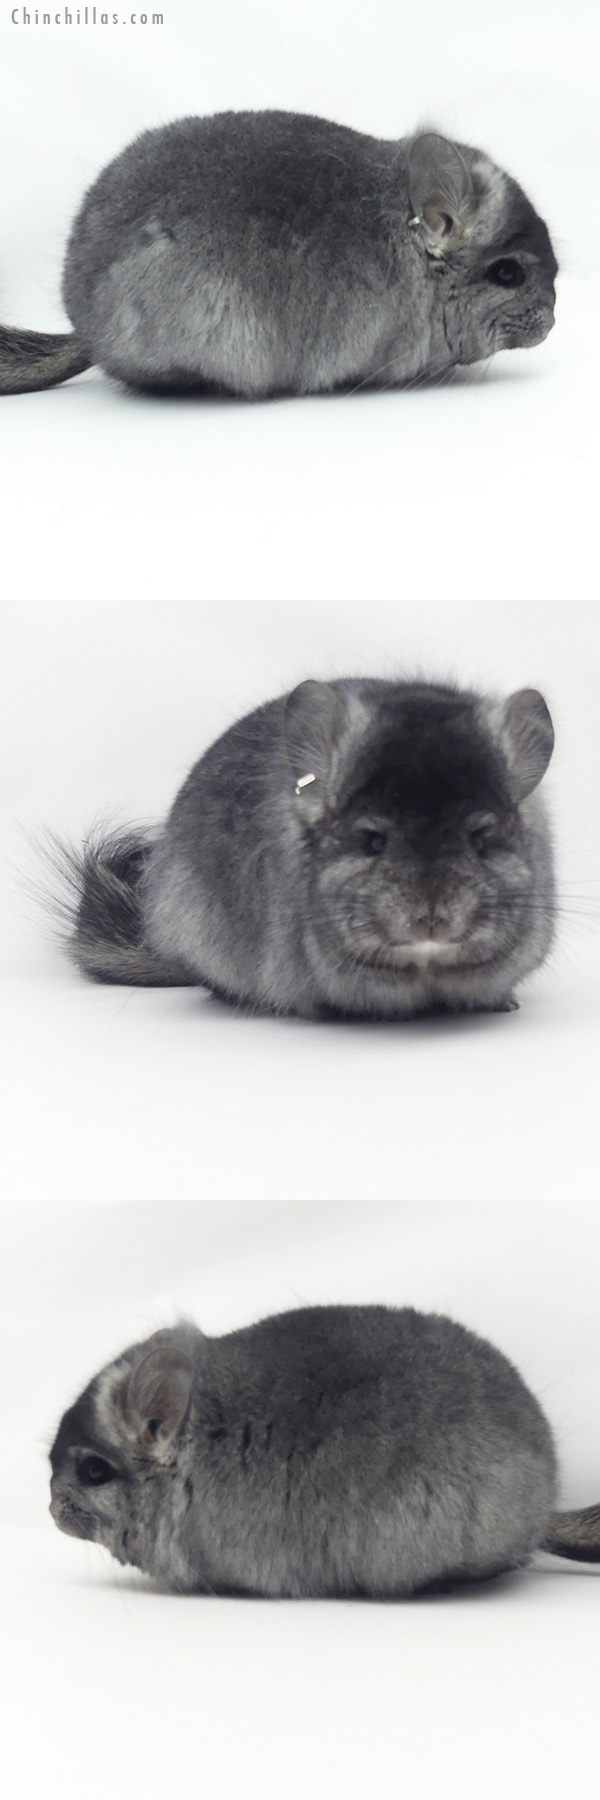 Chinchilla or related item offered for sale or export on Chinchillas.com - 20144 Ebony  Royal Persian Angora Female Chinchilla